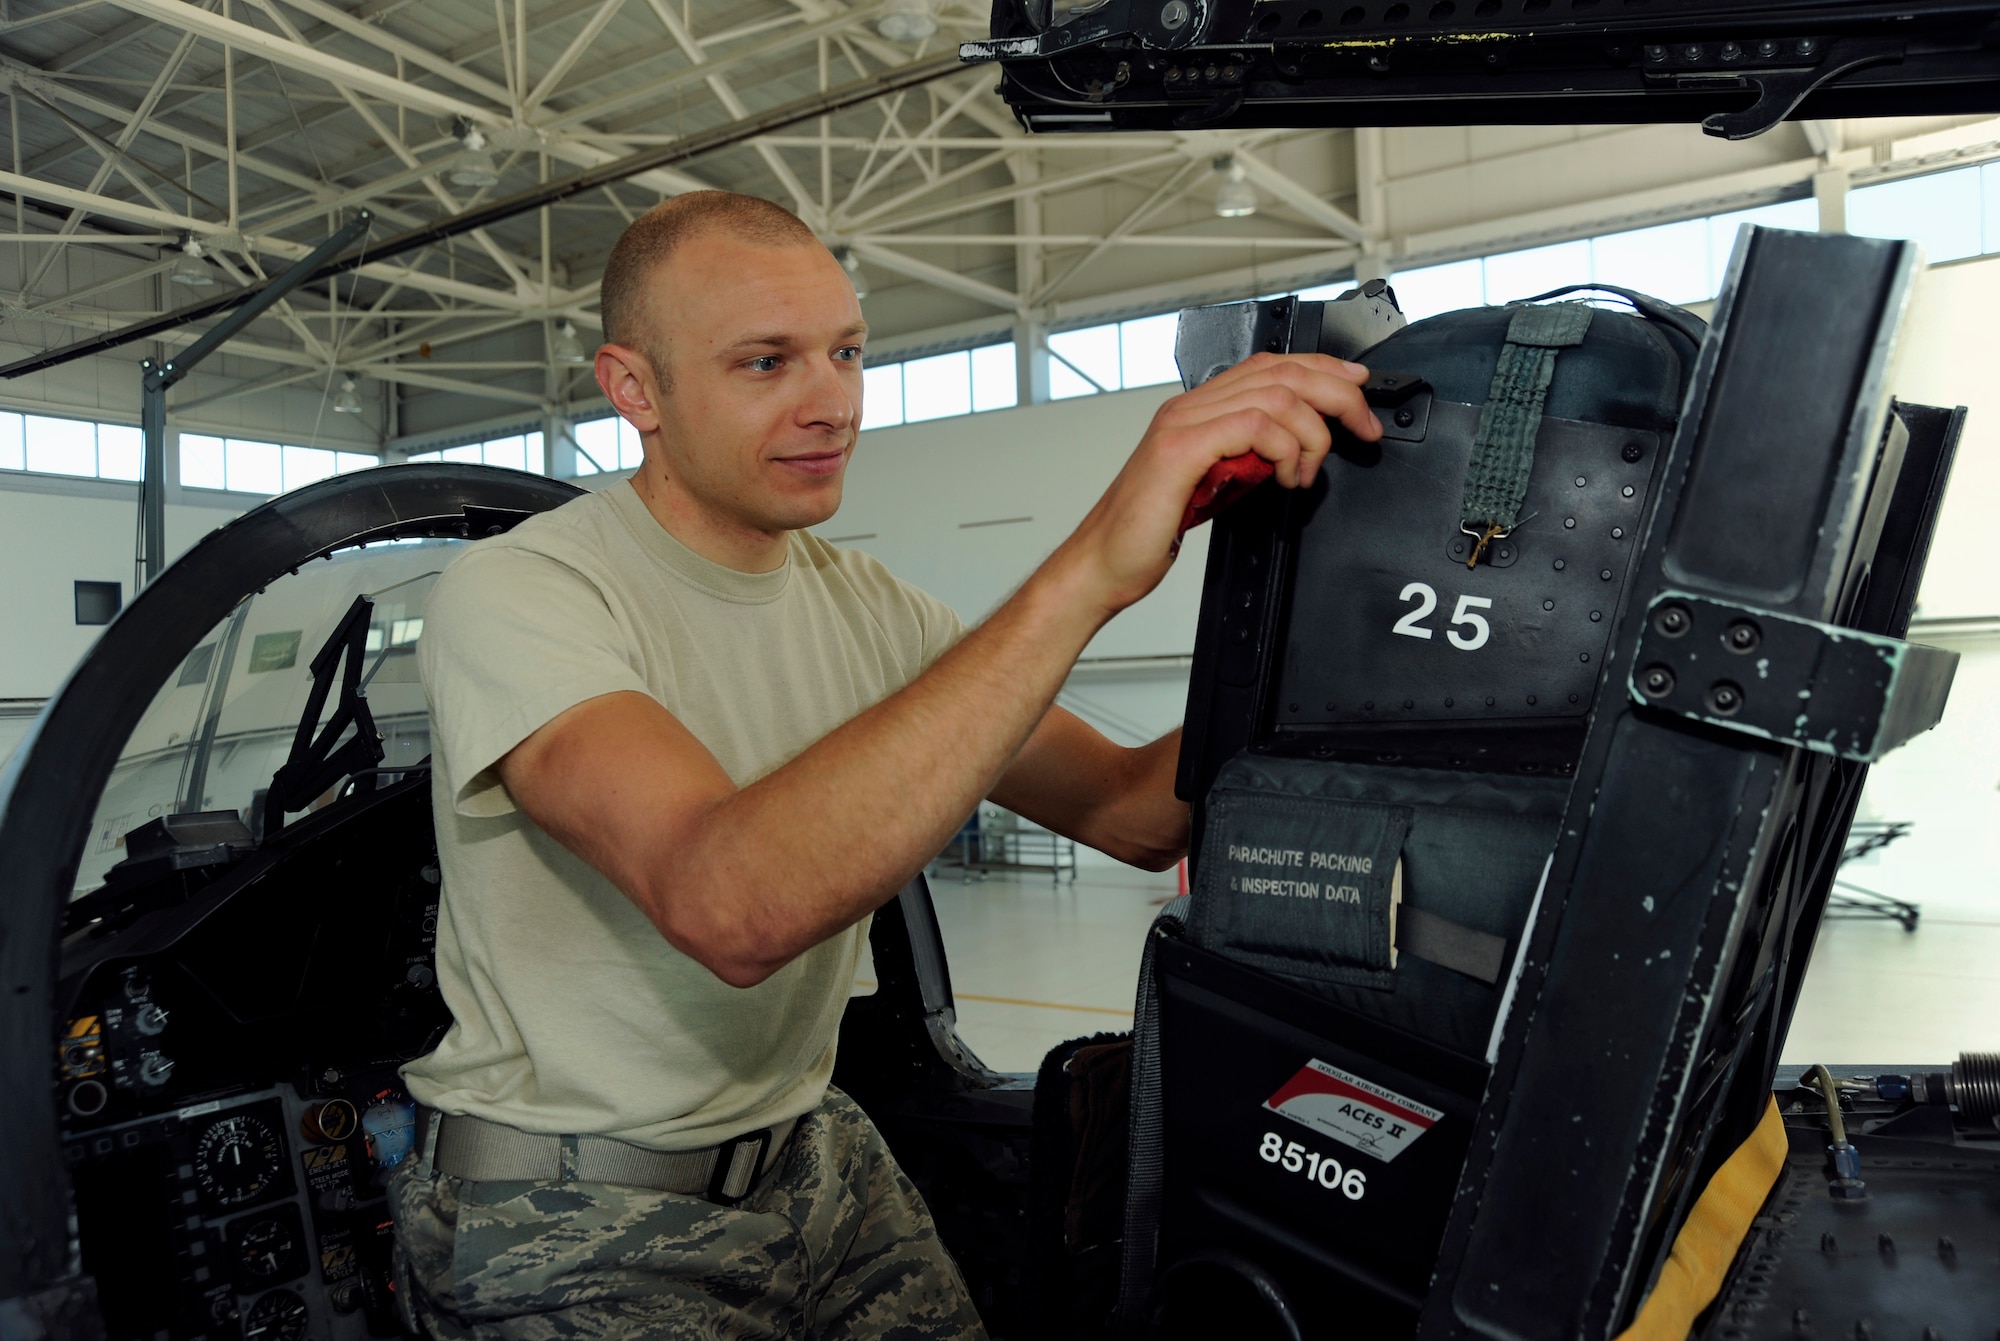 Tech. Sgt. Dwayne Farr, an egress repairman with Oregon Air National Guard’s 142nd Aircraft Maintenance Squadron, inspects an F-15 Strike Eagle seat at Portland Air National Guard Base, Ore., July 9, 2013. (U.S. Air National Guard Photo/Tech. Sgt. John Hughel)